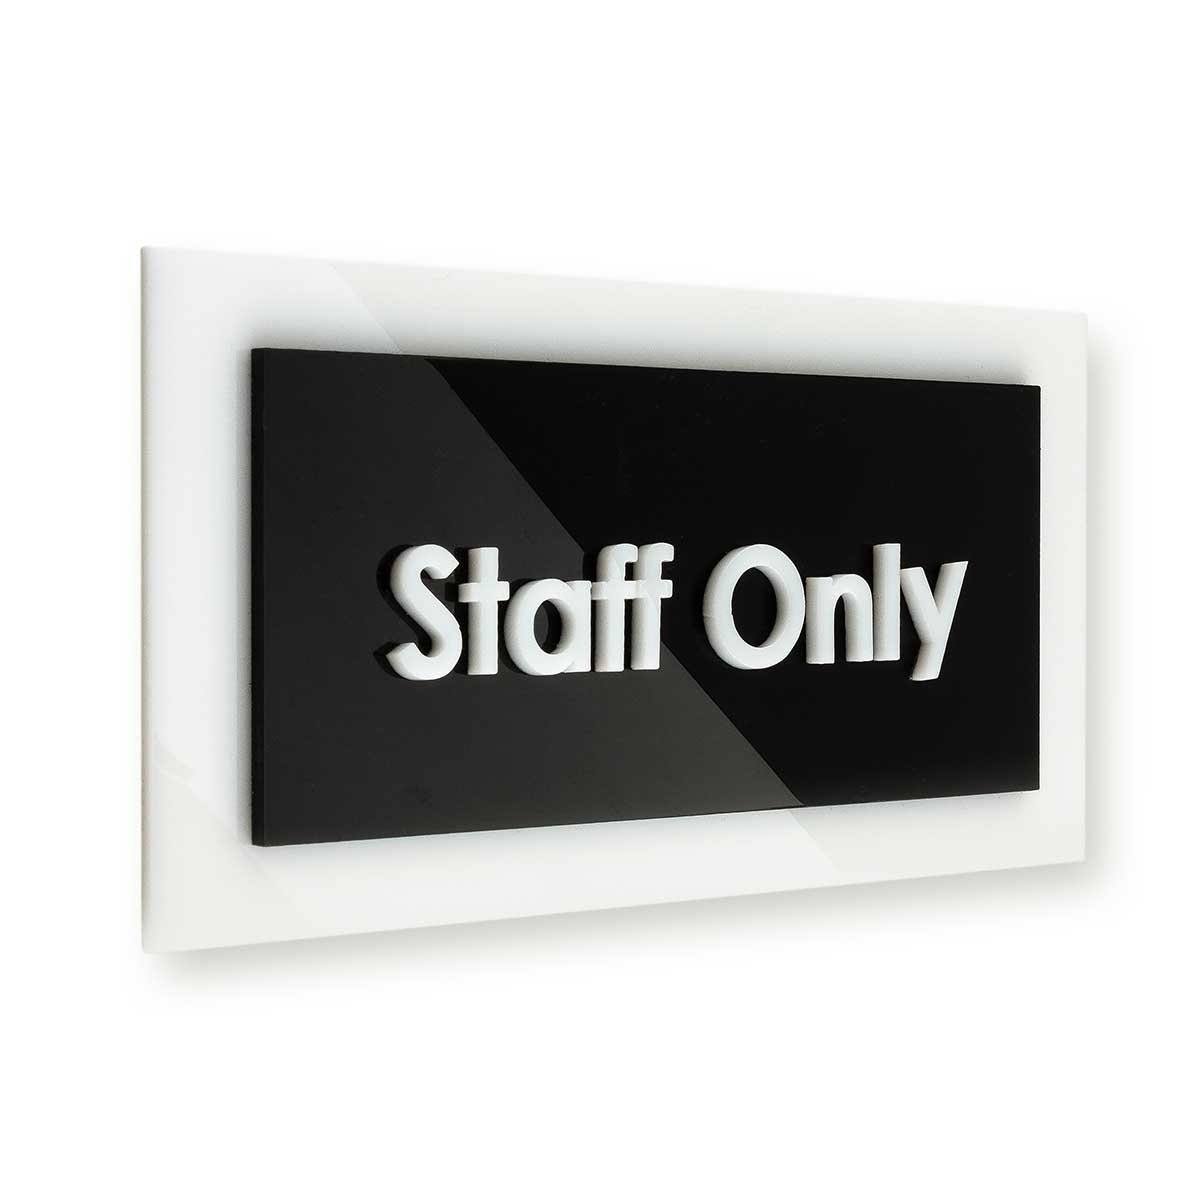 Door Signs - Authorized Personnel Only Signs - Custom Acrylic Door Sign "Simple" Design